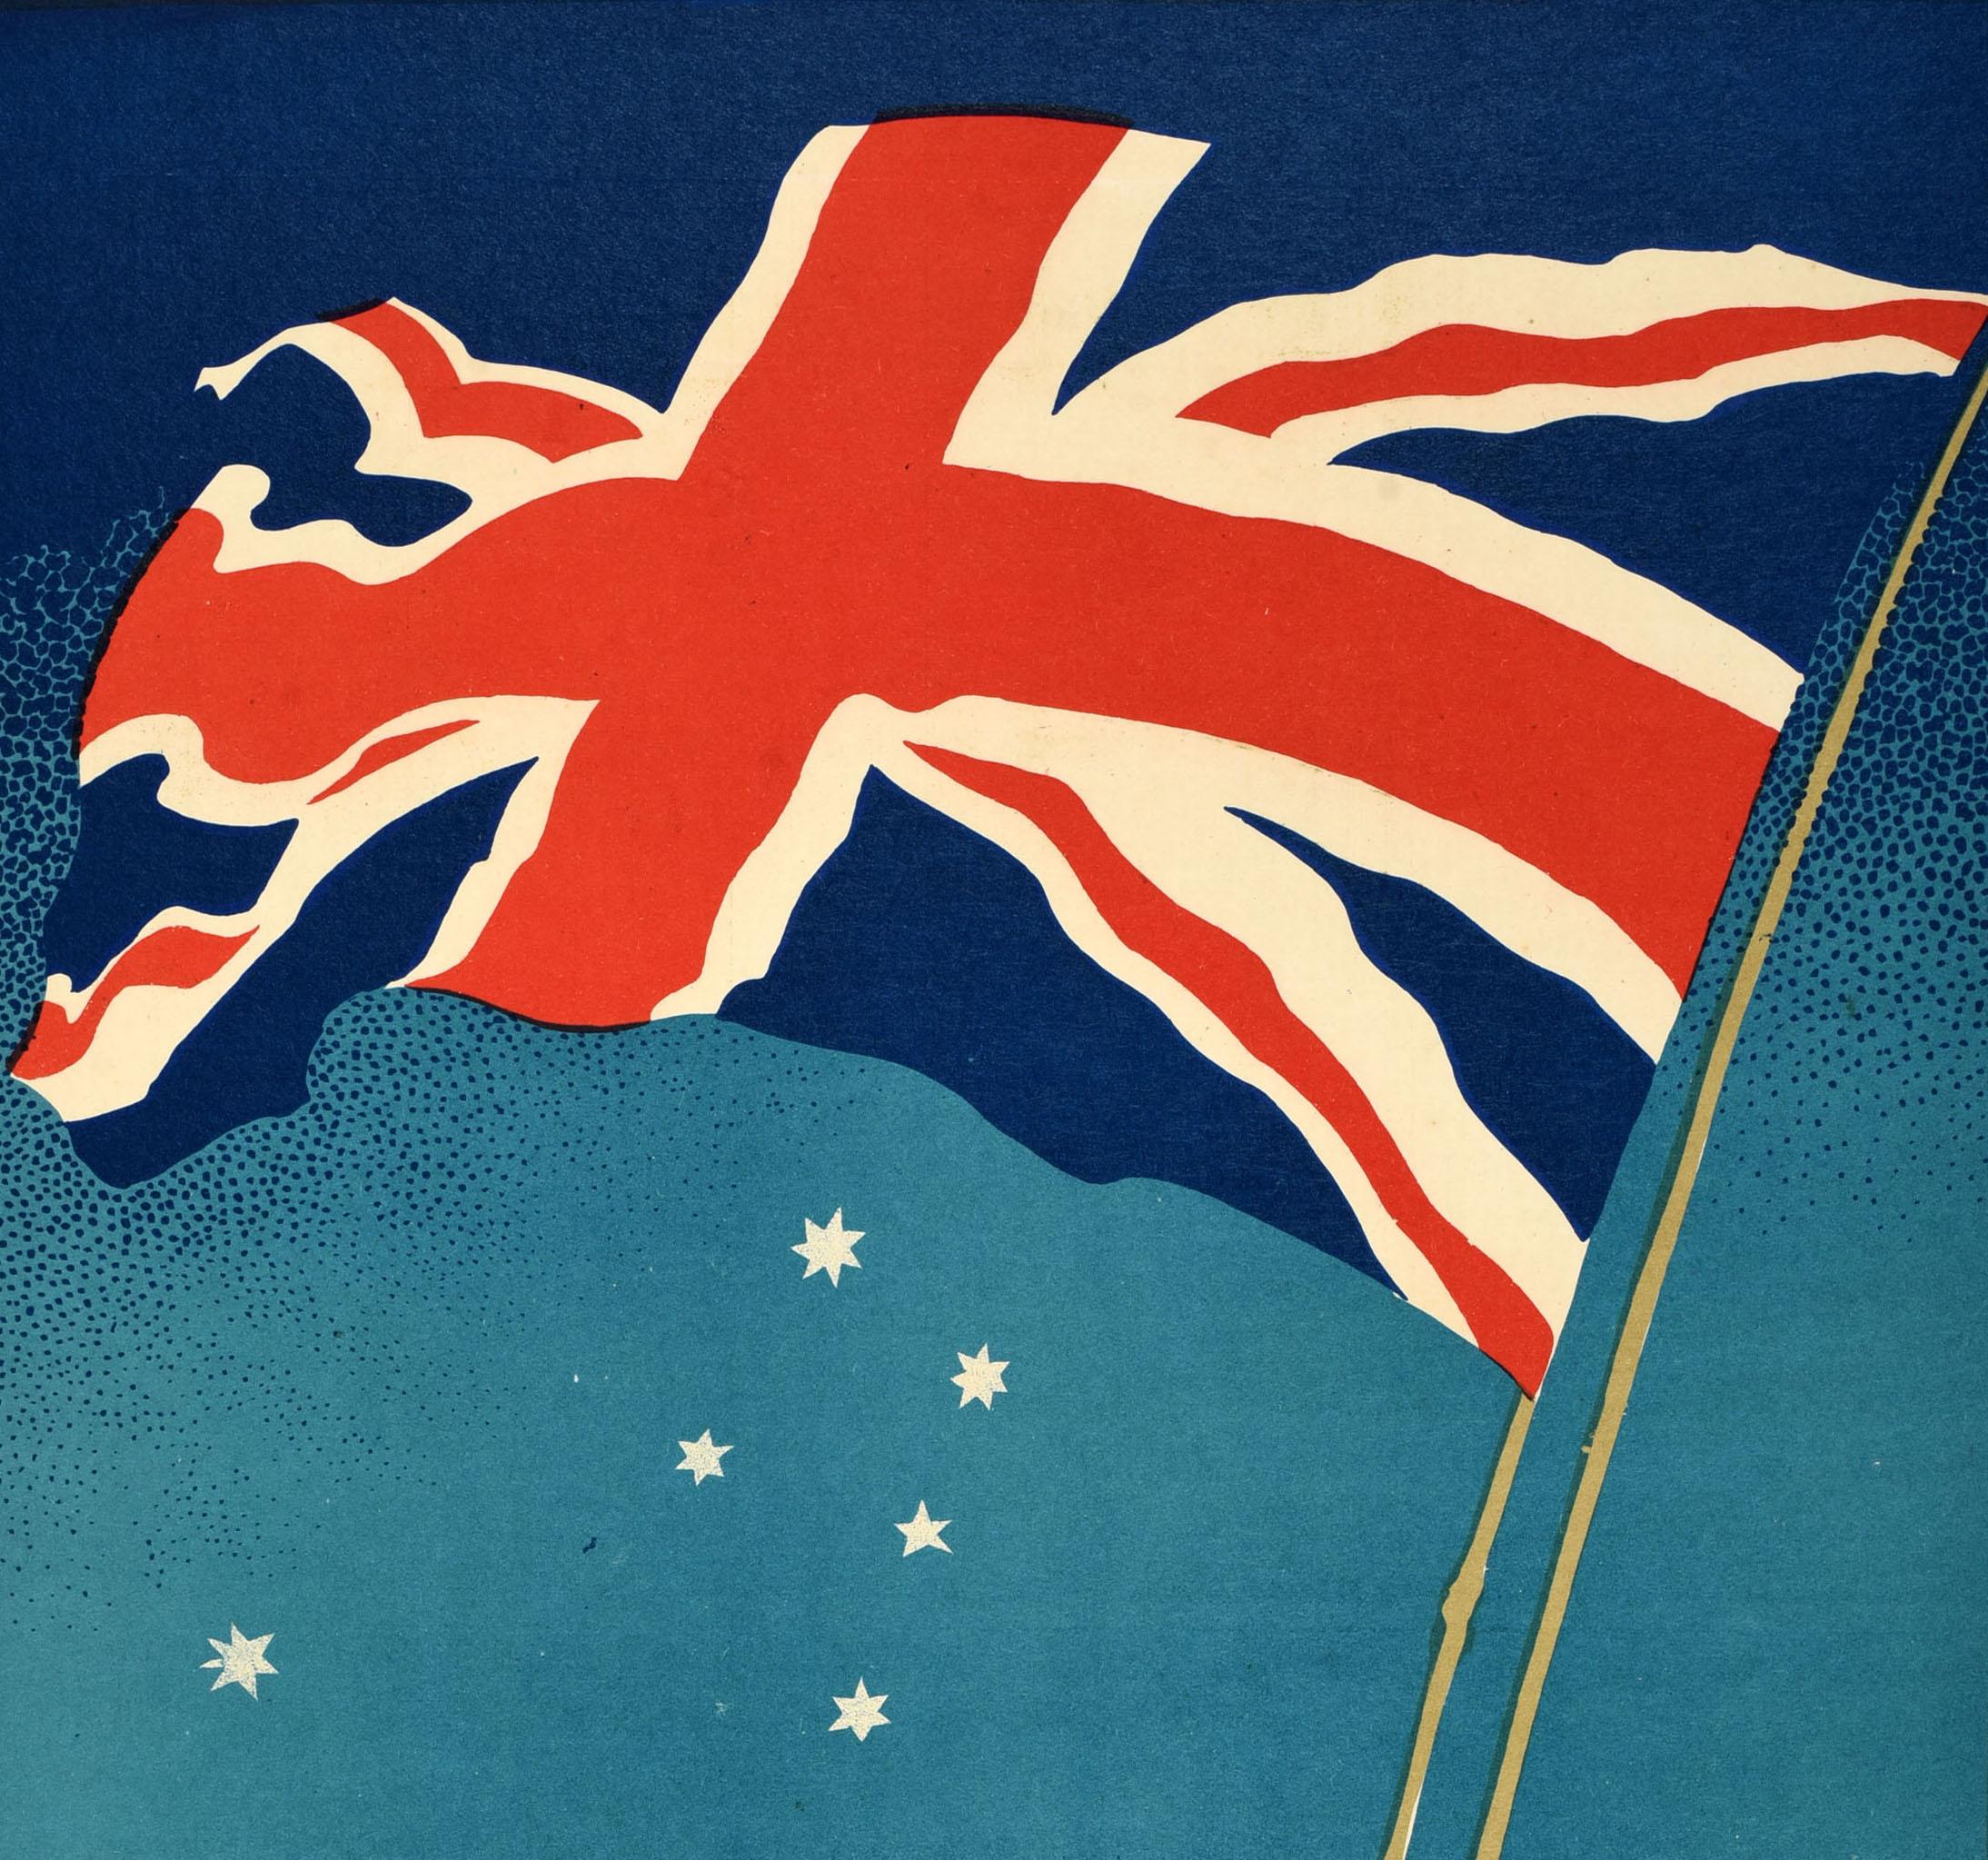 Original vintage advertising poster - Buy Empire Goods Australia is a Partner Empire Shopping Week 20 to 25 May issued by the New South Wales Shopping Week Council - featuring an illustration of the Union Jack flag flying against a white star